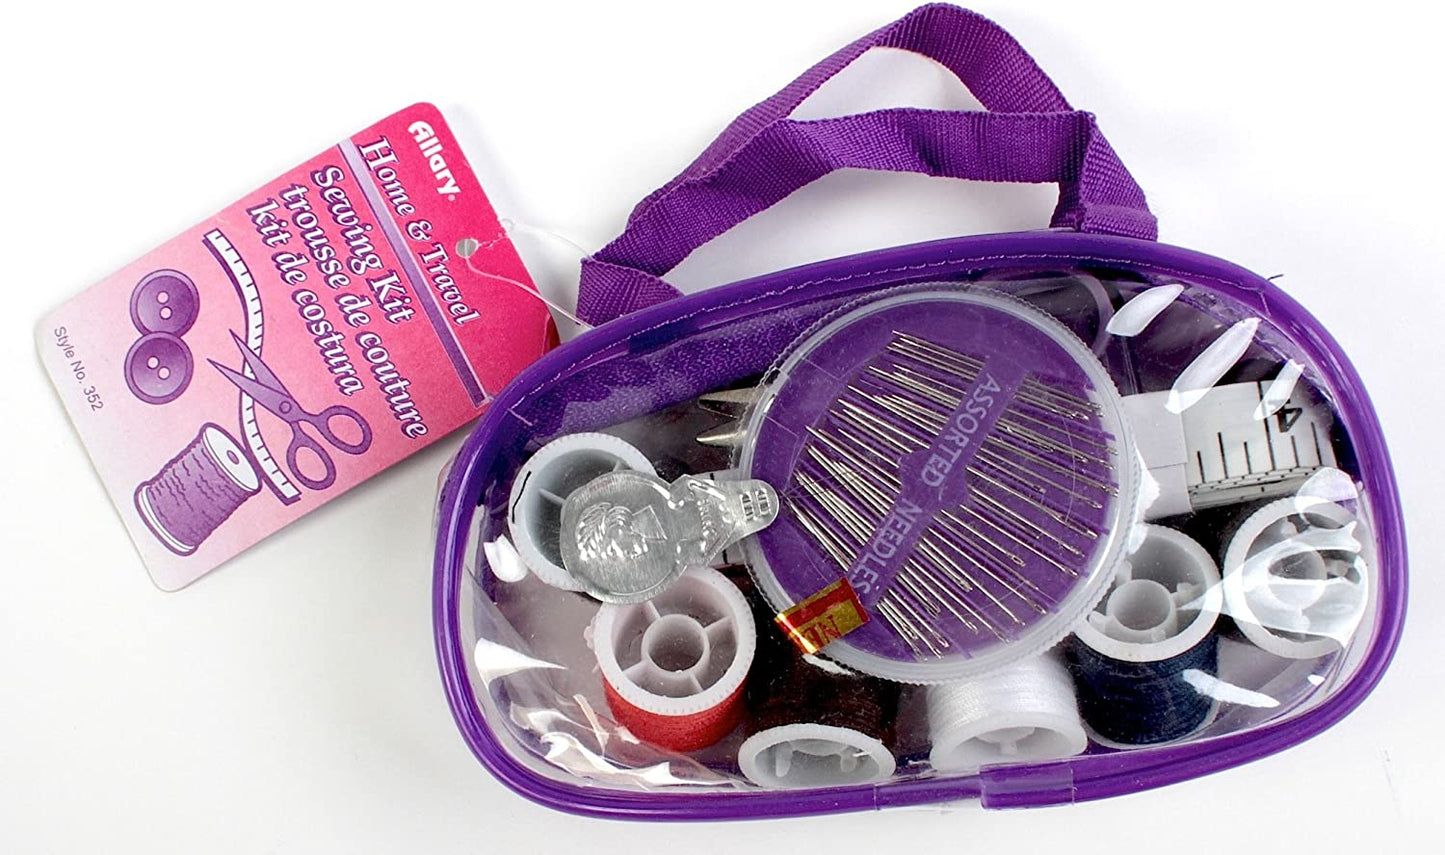 Allary Home & Travel Sewing Kit